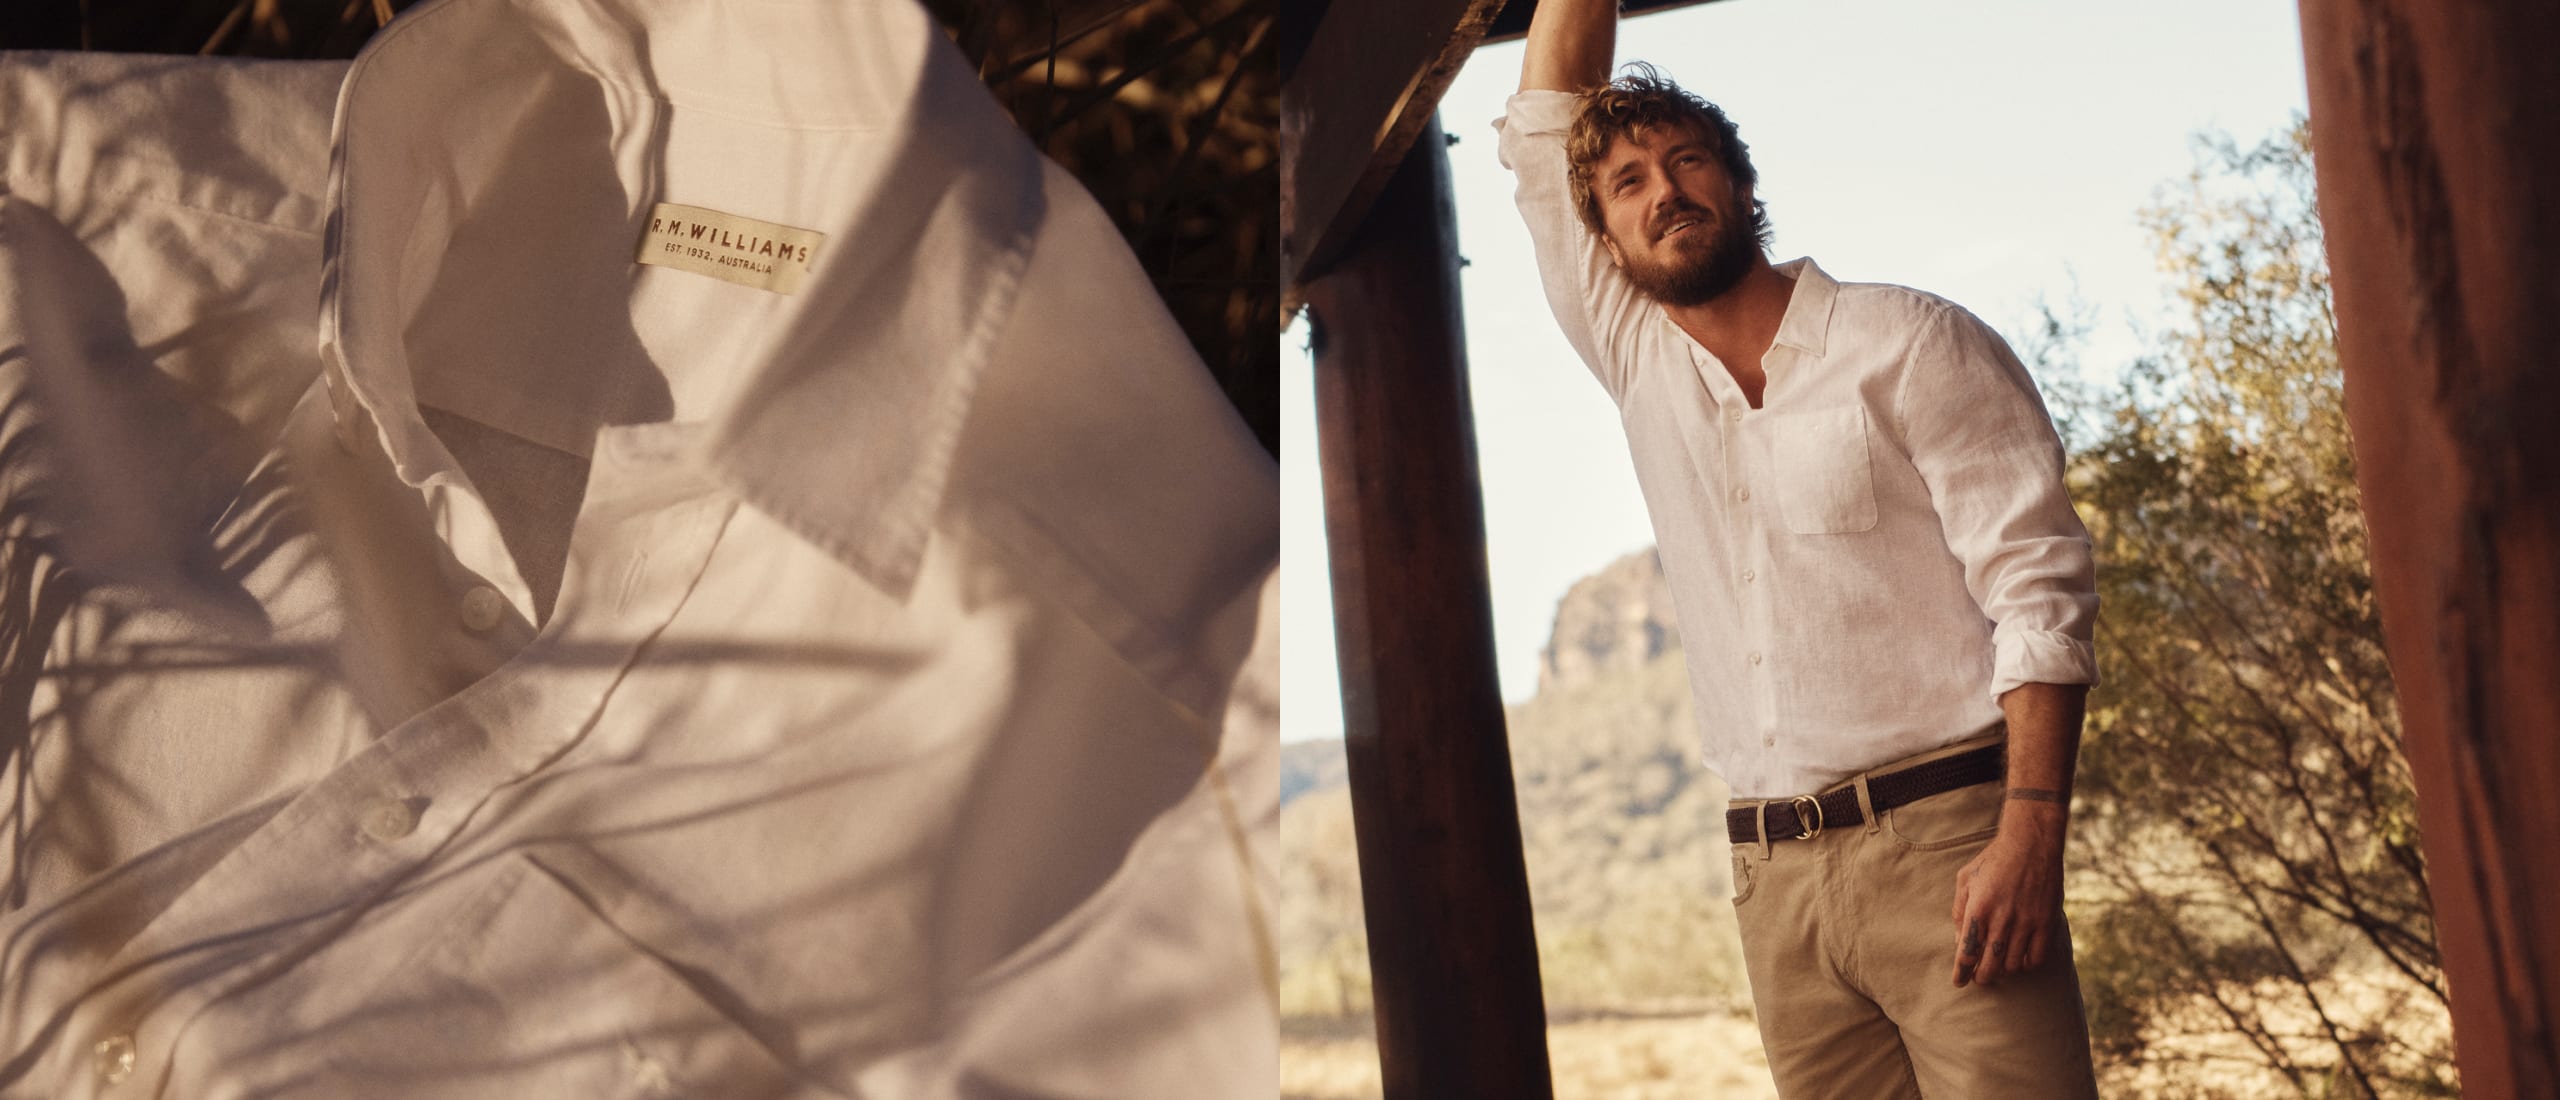 R.M. Williams Drops a Rugged New Collection 'For The Fathers